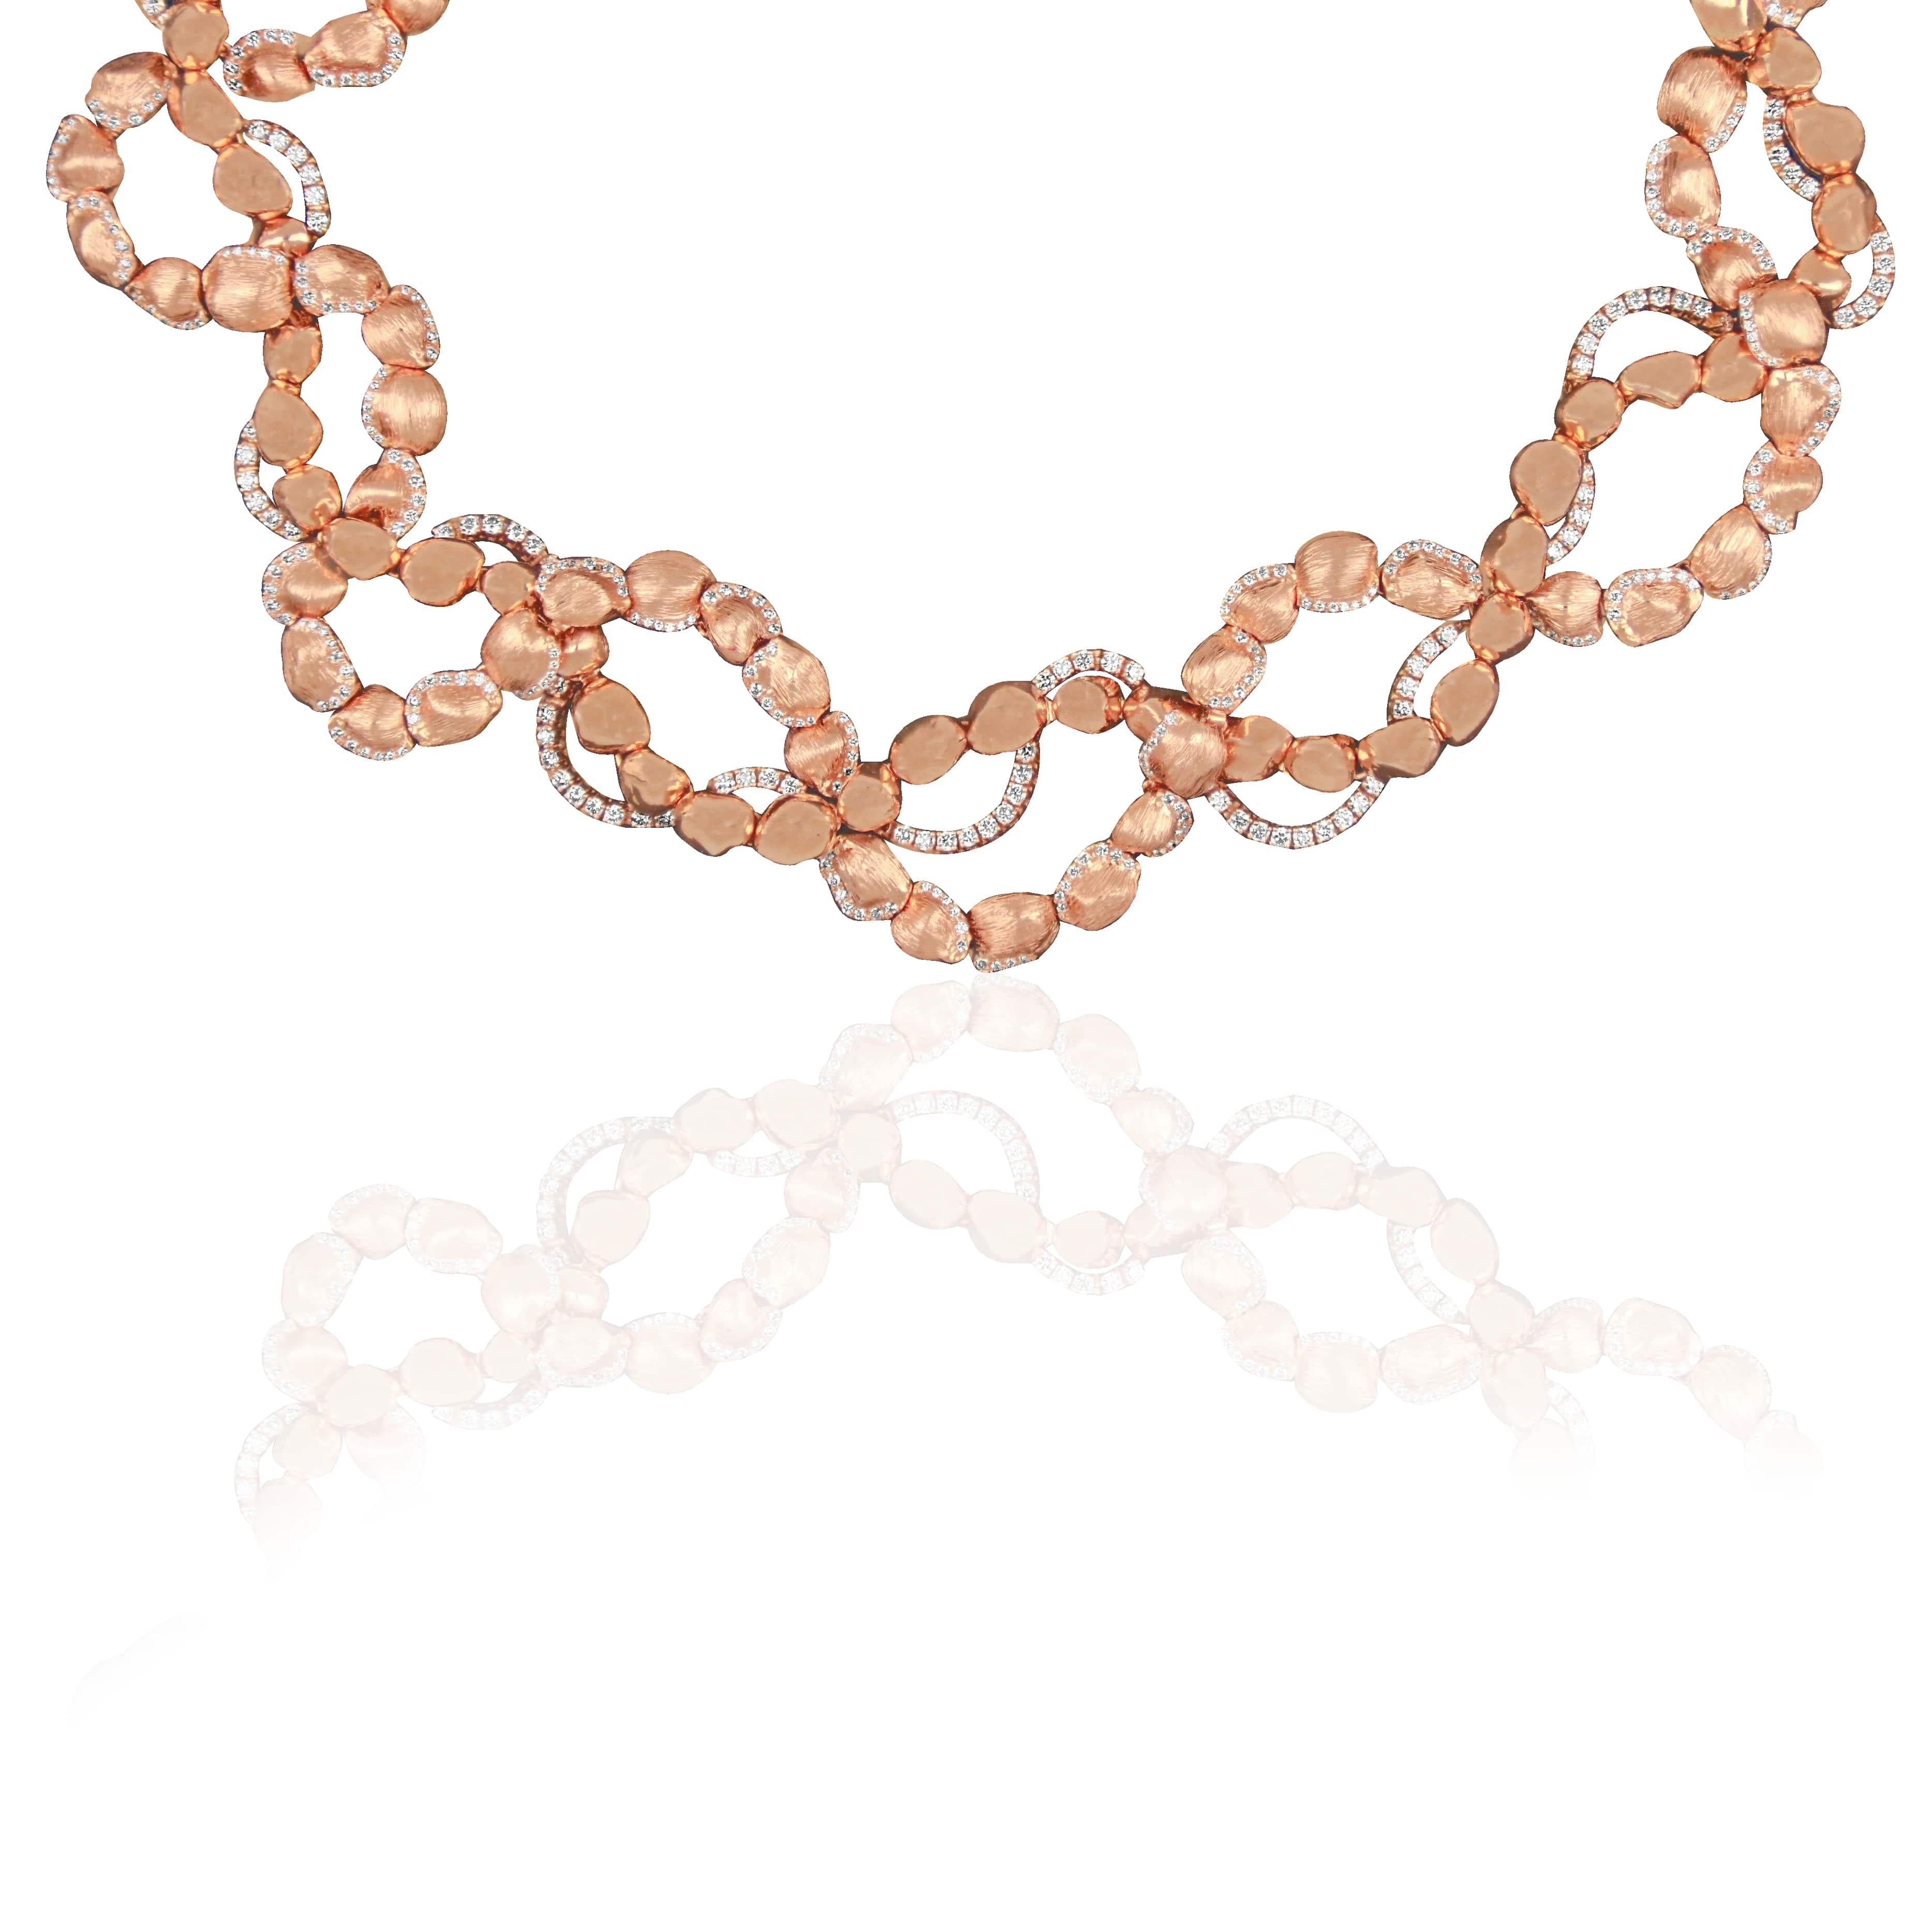 Sarab Collection Statement Necklace takes its shape from the patterns and marking of the desert. Interlacing the finest round cut diamonds and rose gold shiny and matte nuggets to create an echo of the many stories of resilient women of the